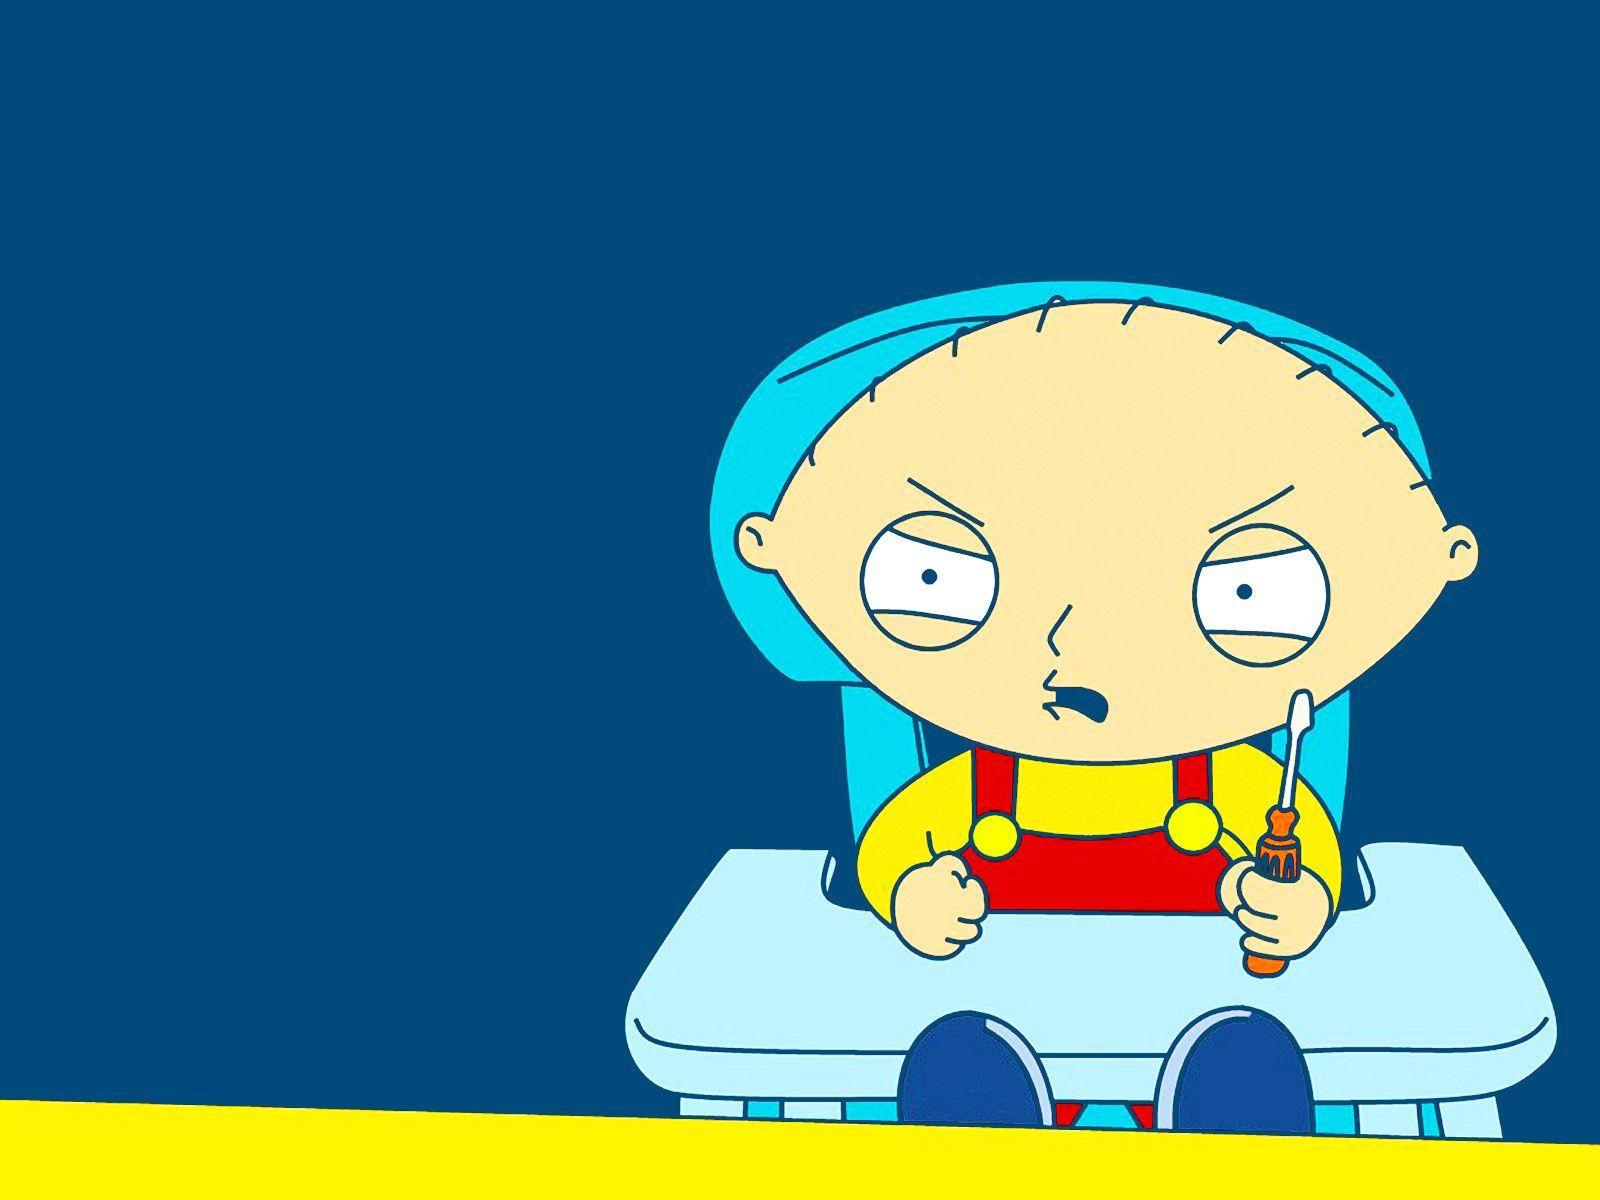 Central Wallpaper: Funny Stewie Griffin Family Guy HD Wallpaper